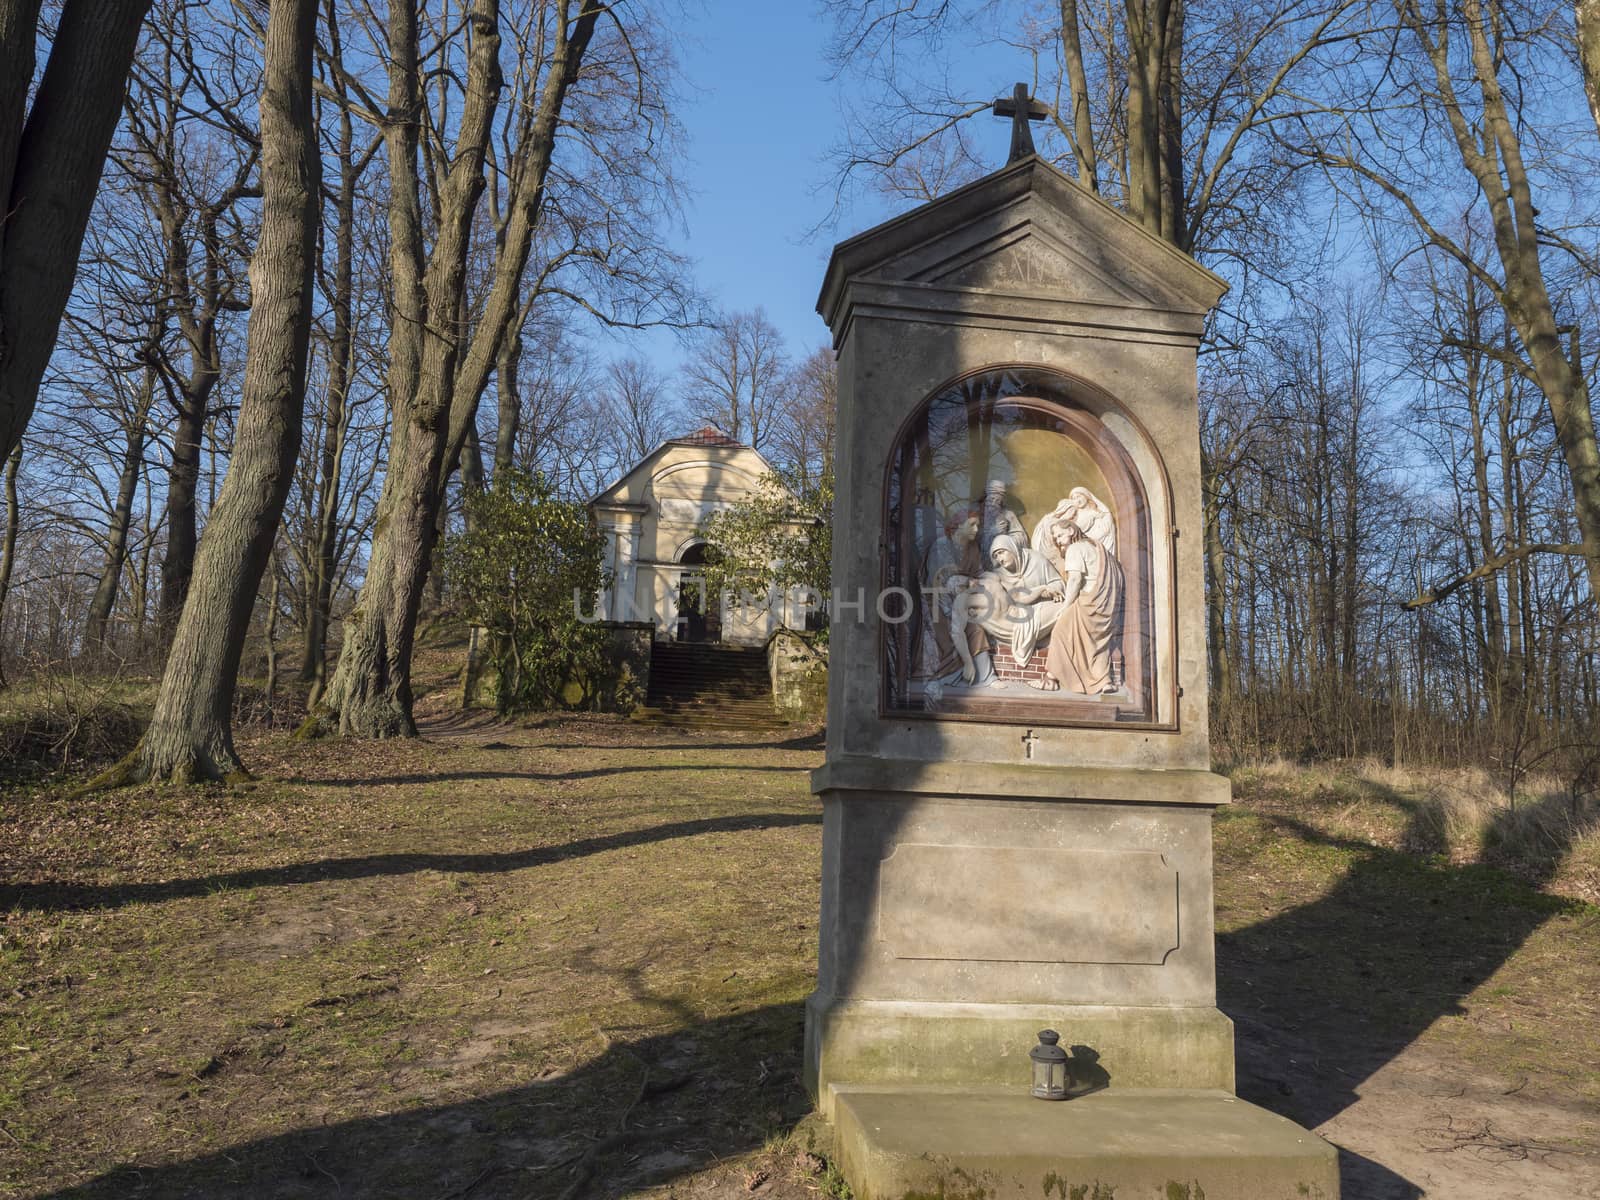 Stations of the Cross in avenue of beech tree near village Cvikov. Calvary with small chapels build in 1728 by Johann Franz Richter. Pilgrimage place Luzicke hory, Lusatian Mountains, spring, blue sky by Henkeova